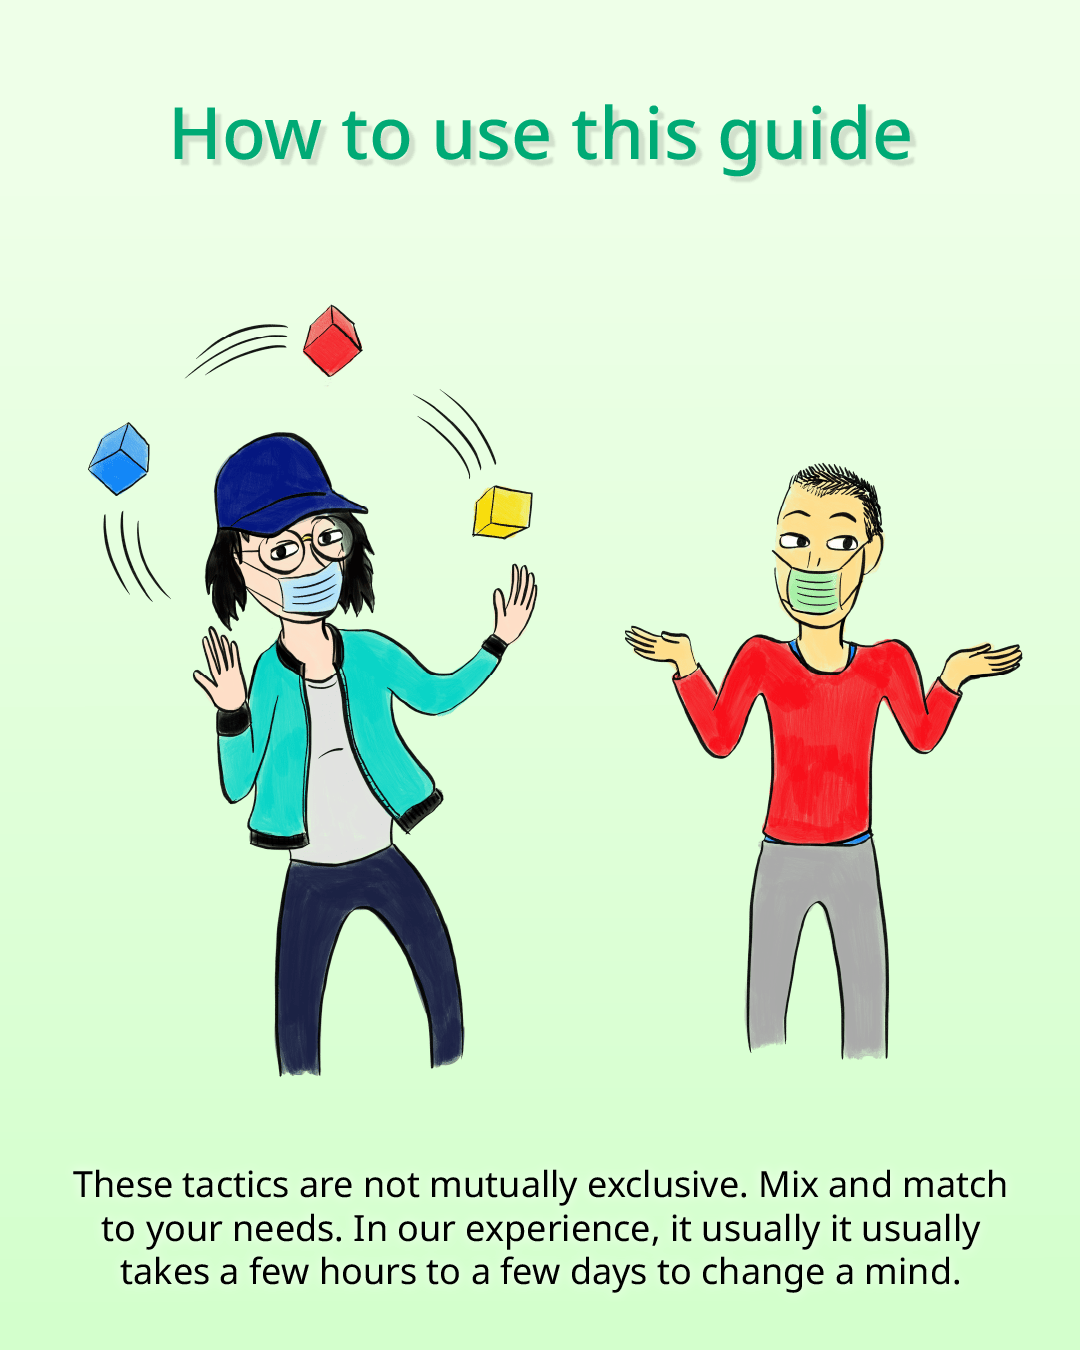 Housemate guide image 2/10